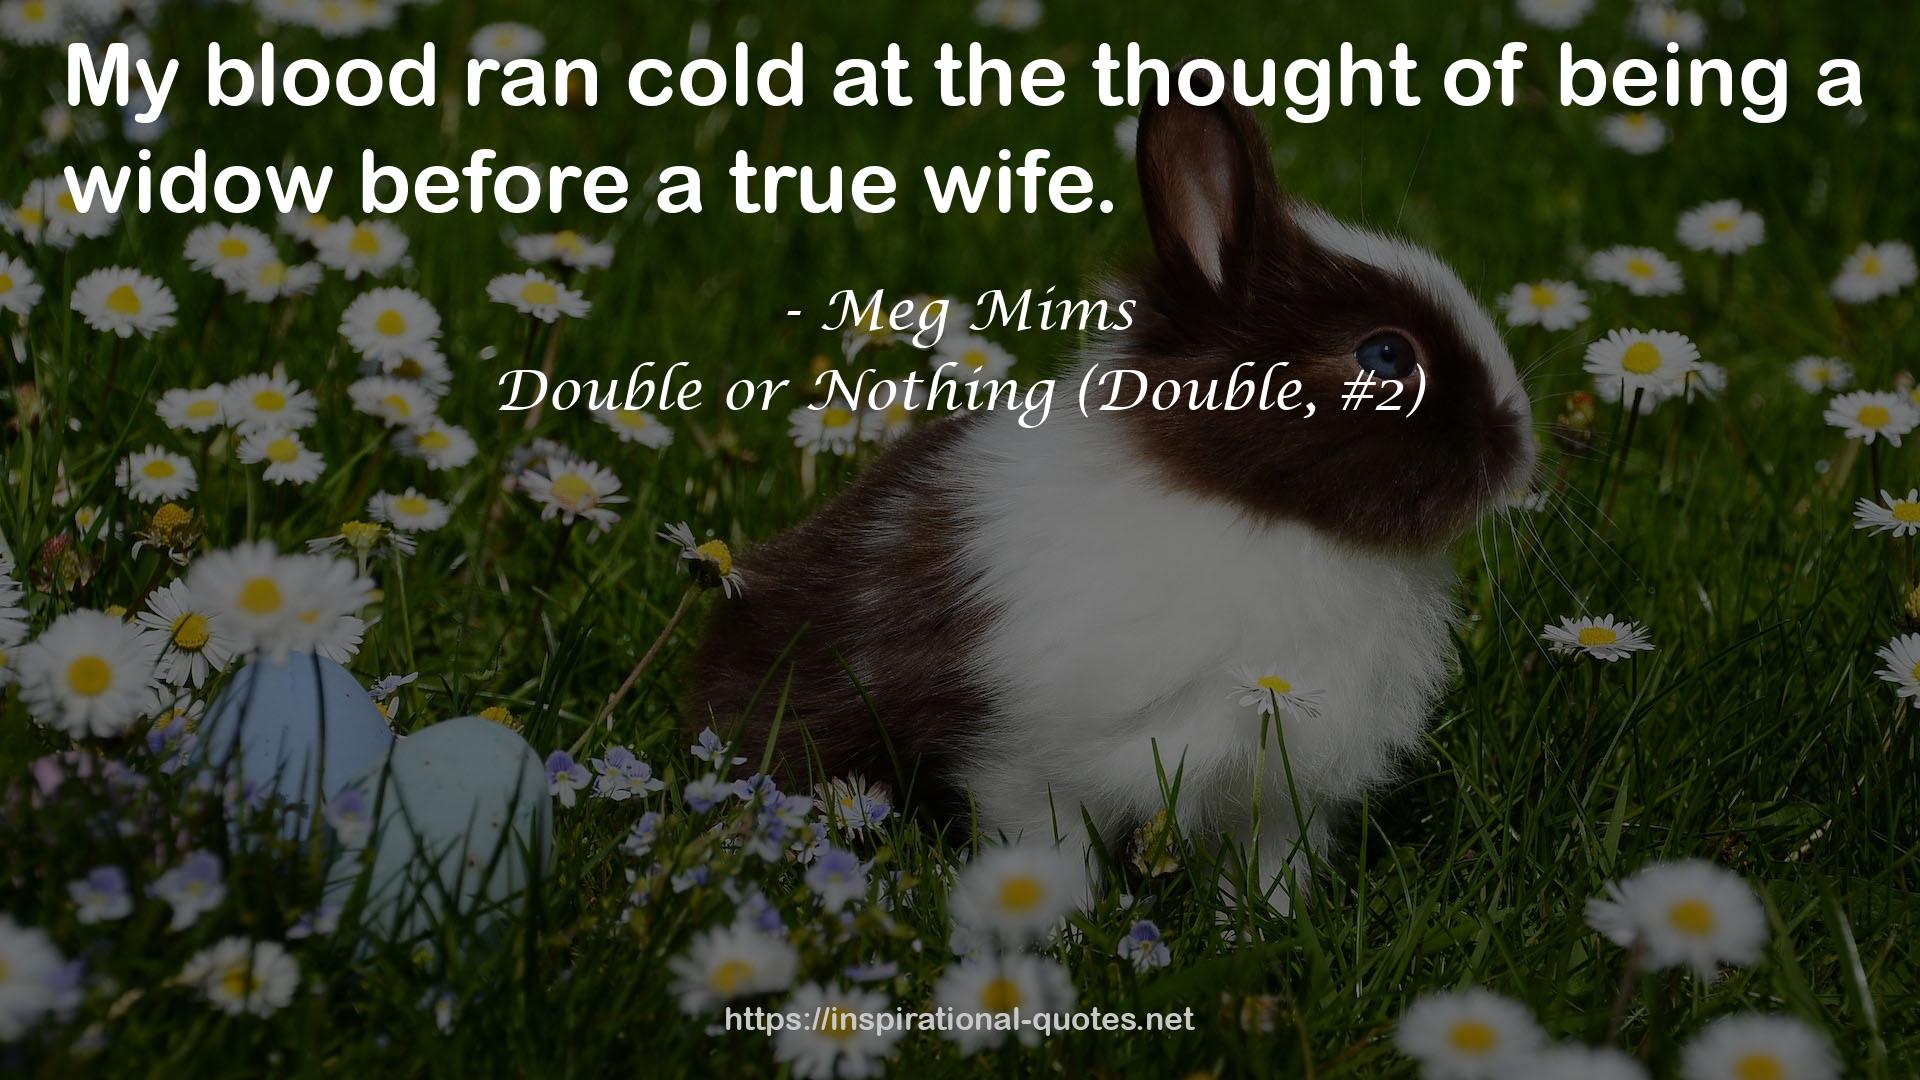 Double or Nothing (Double, #2) QUOTES